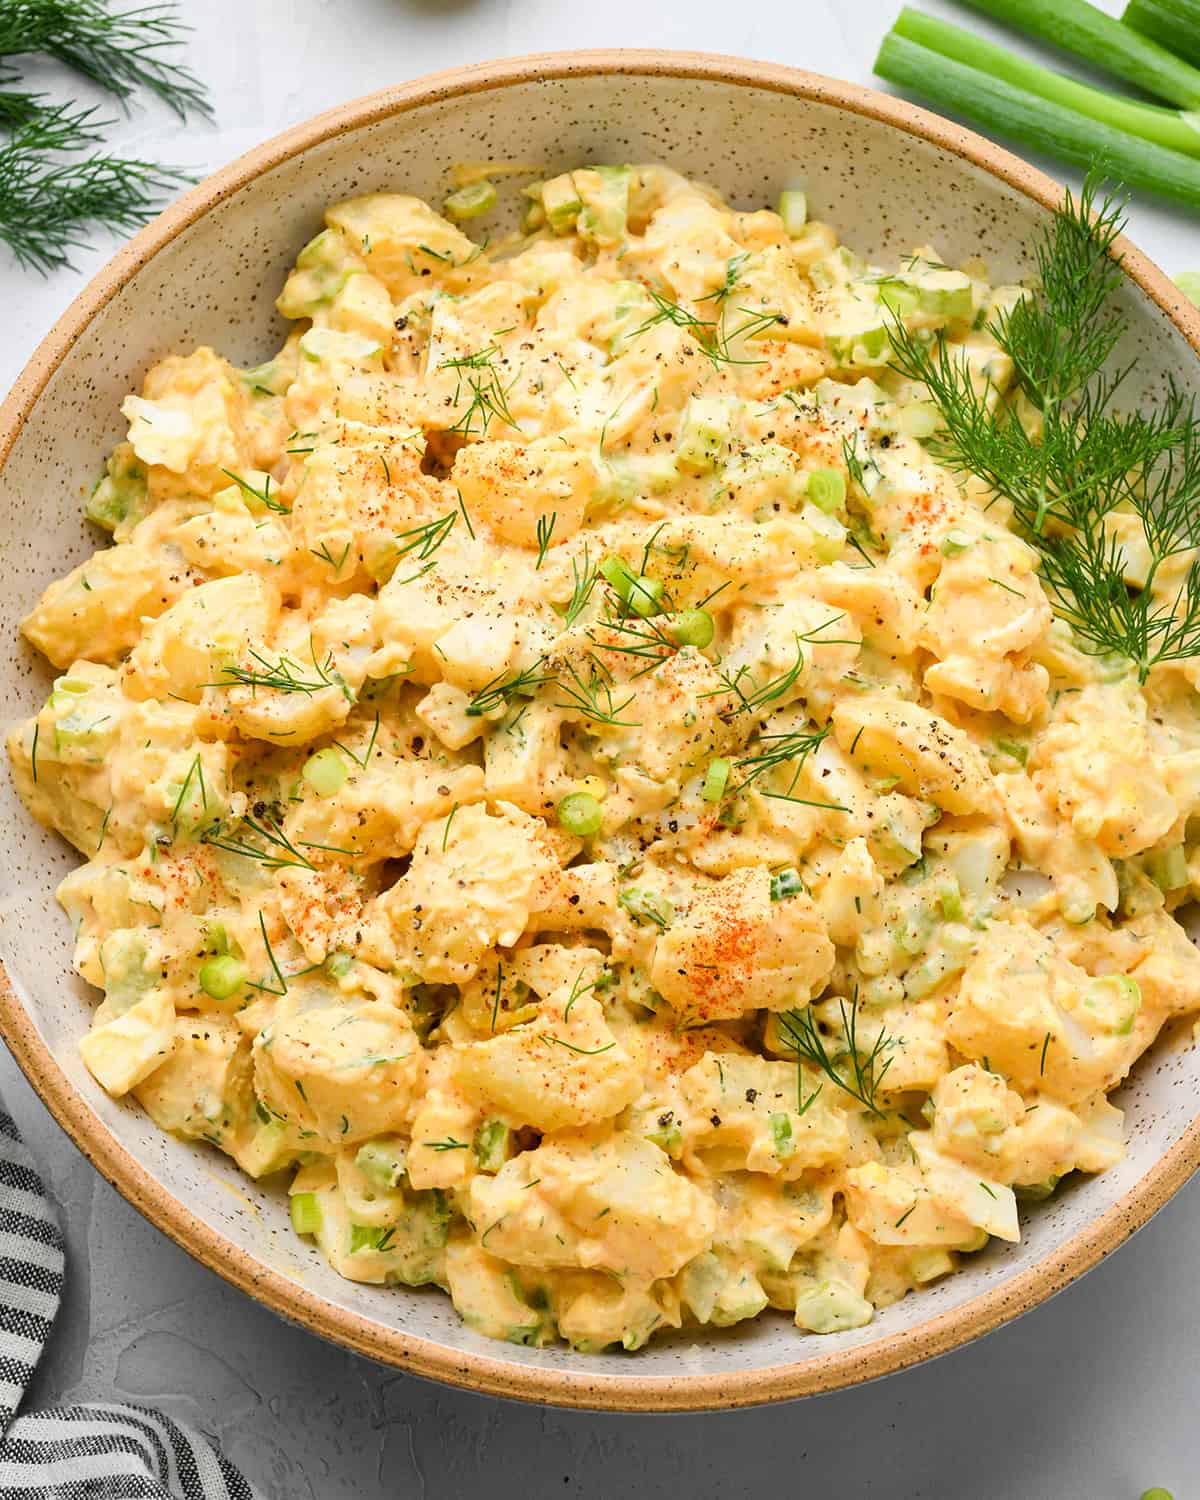 a bowl of Potato Salad garnished with dill and green onions